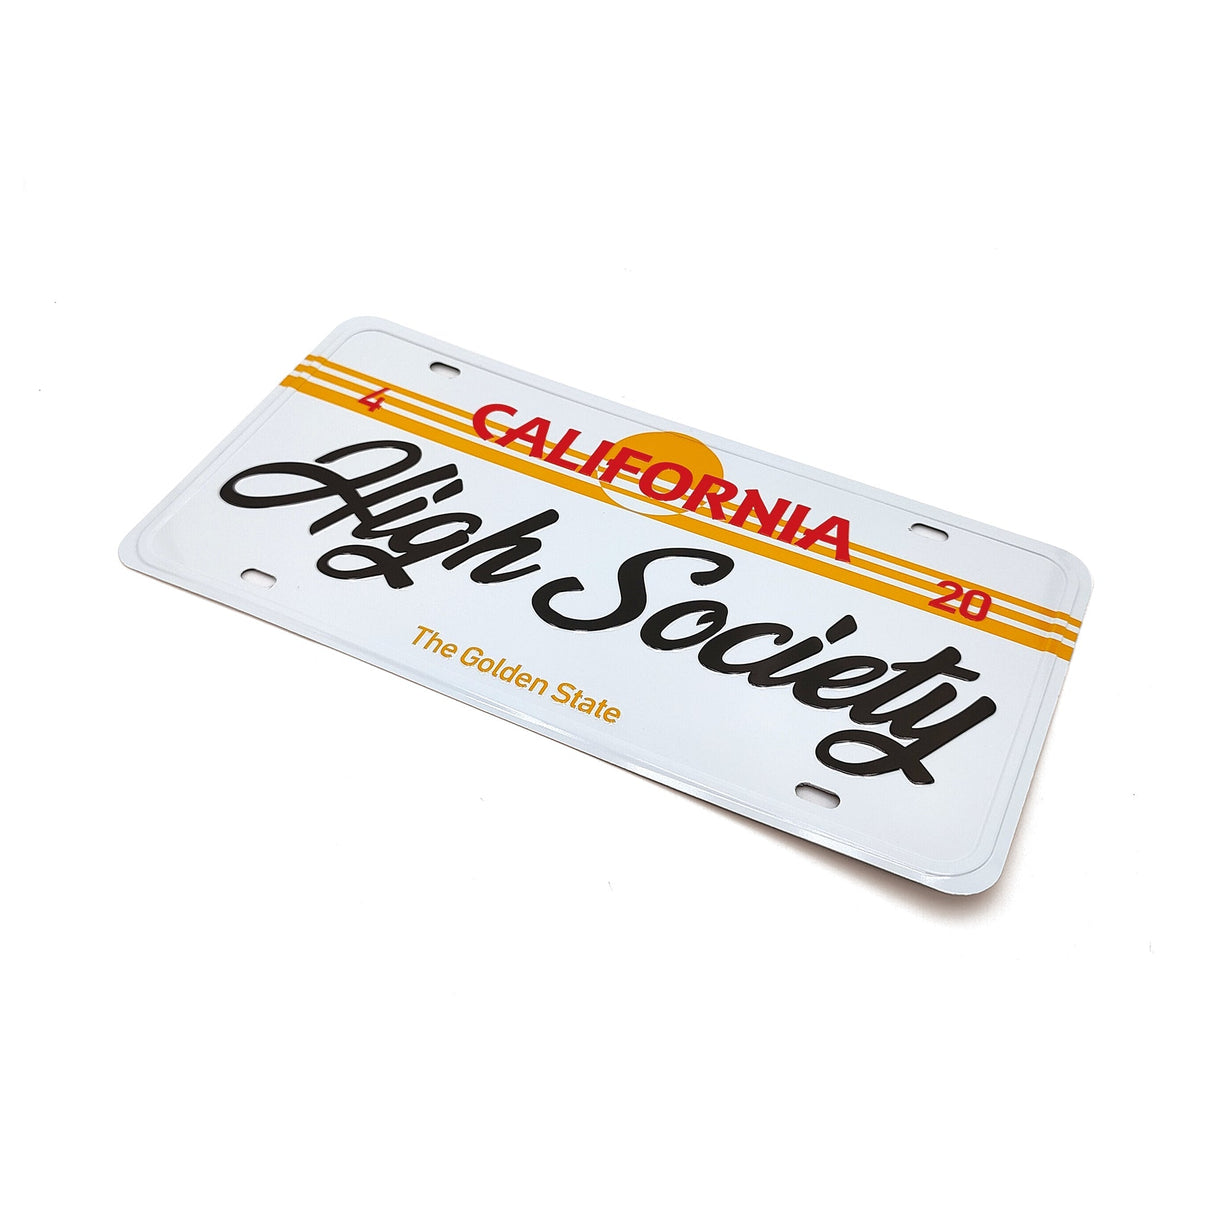 High Society Limited Edition California Car Plate with Custom Graphics - Front View